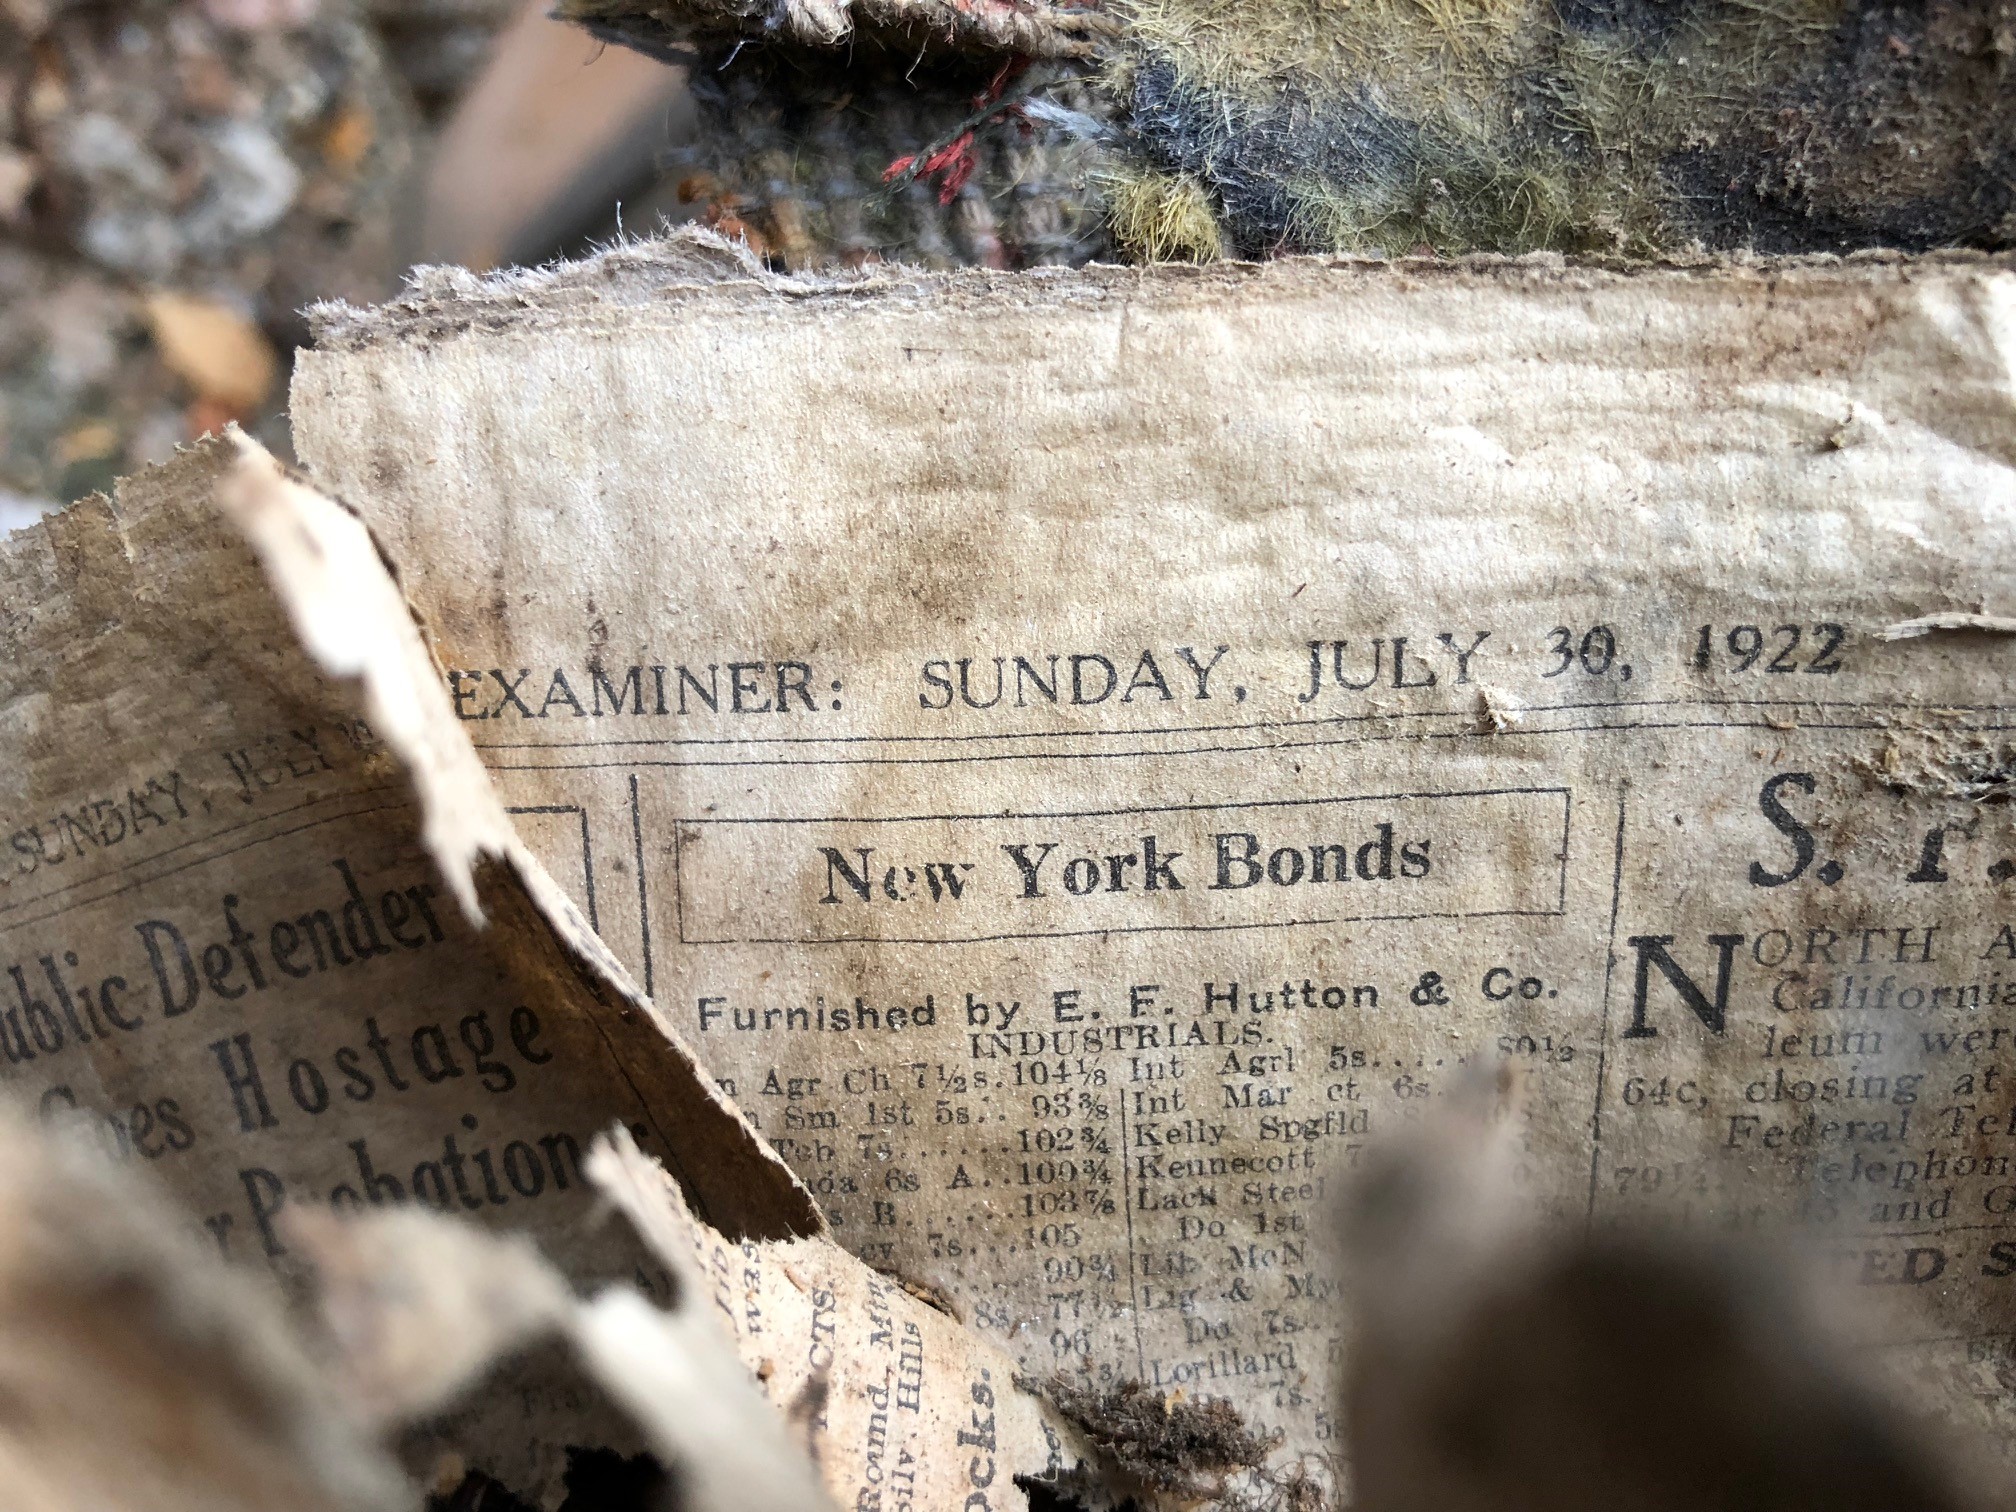 1922 newspaper in degrading condition